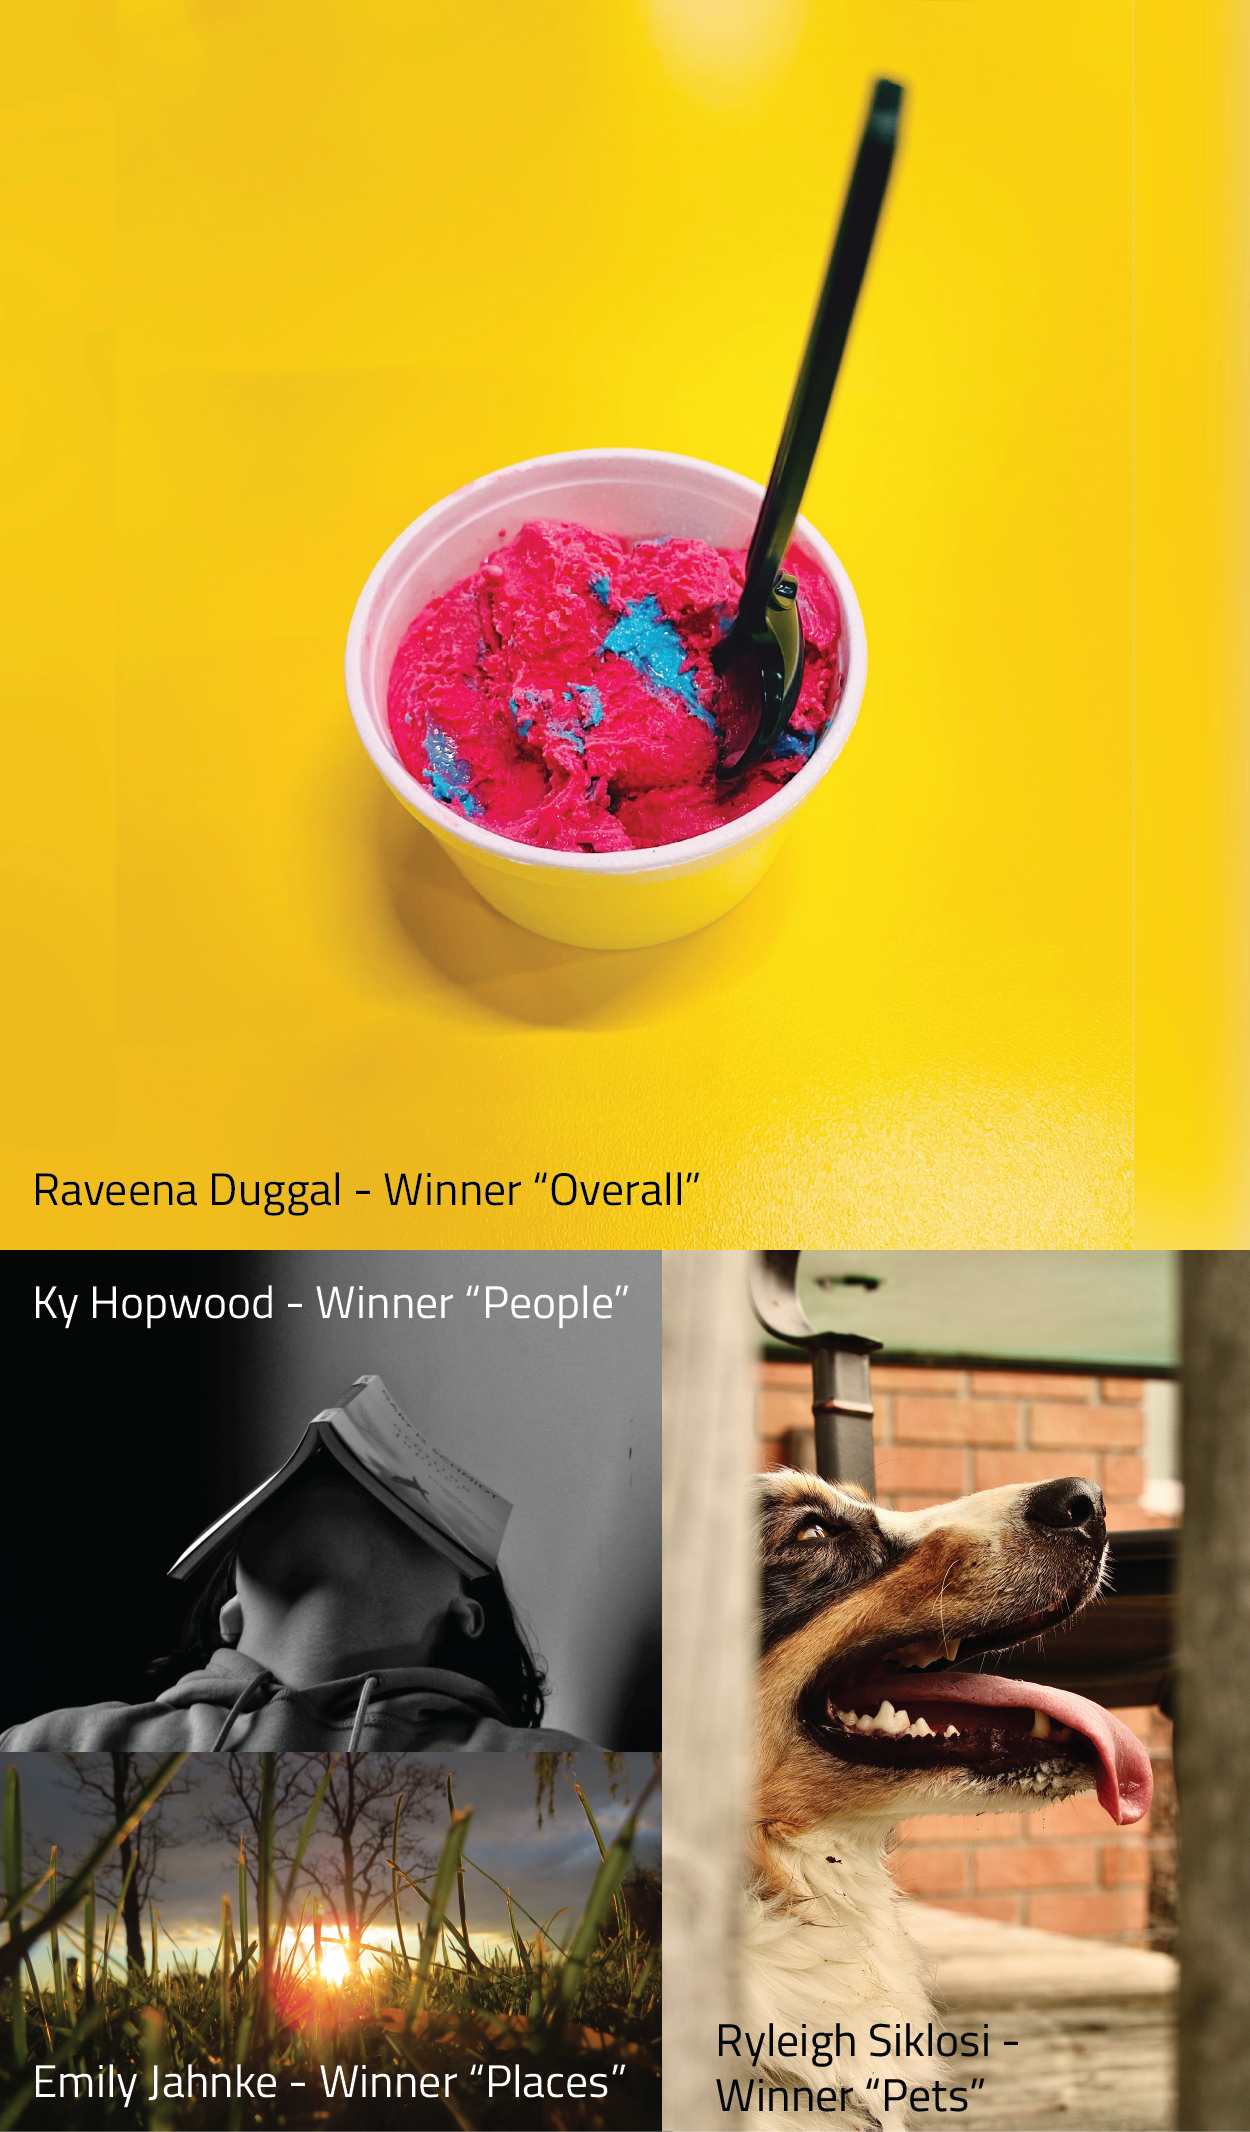 Image of four winning photos: Ice cream on a yellow background, dog with tongue out, landscape of a field, person with a book over their hear